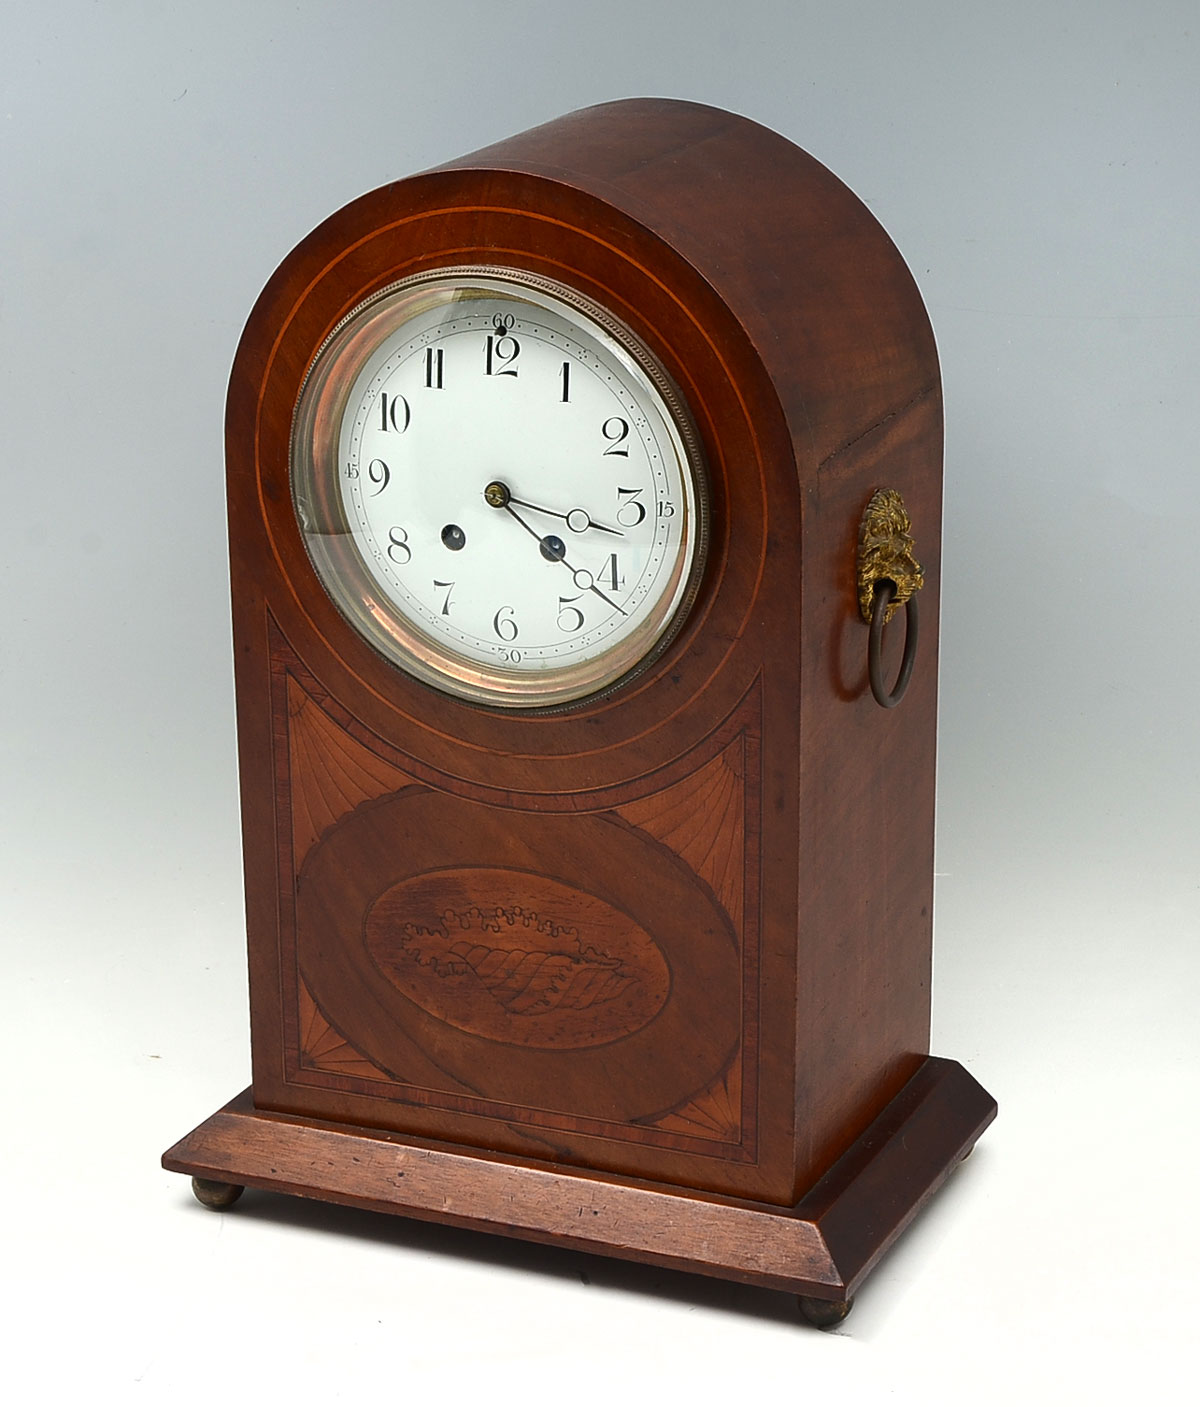 INLAID DOME TOP MANTLE CLOCK: Mantle